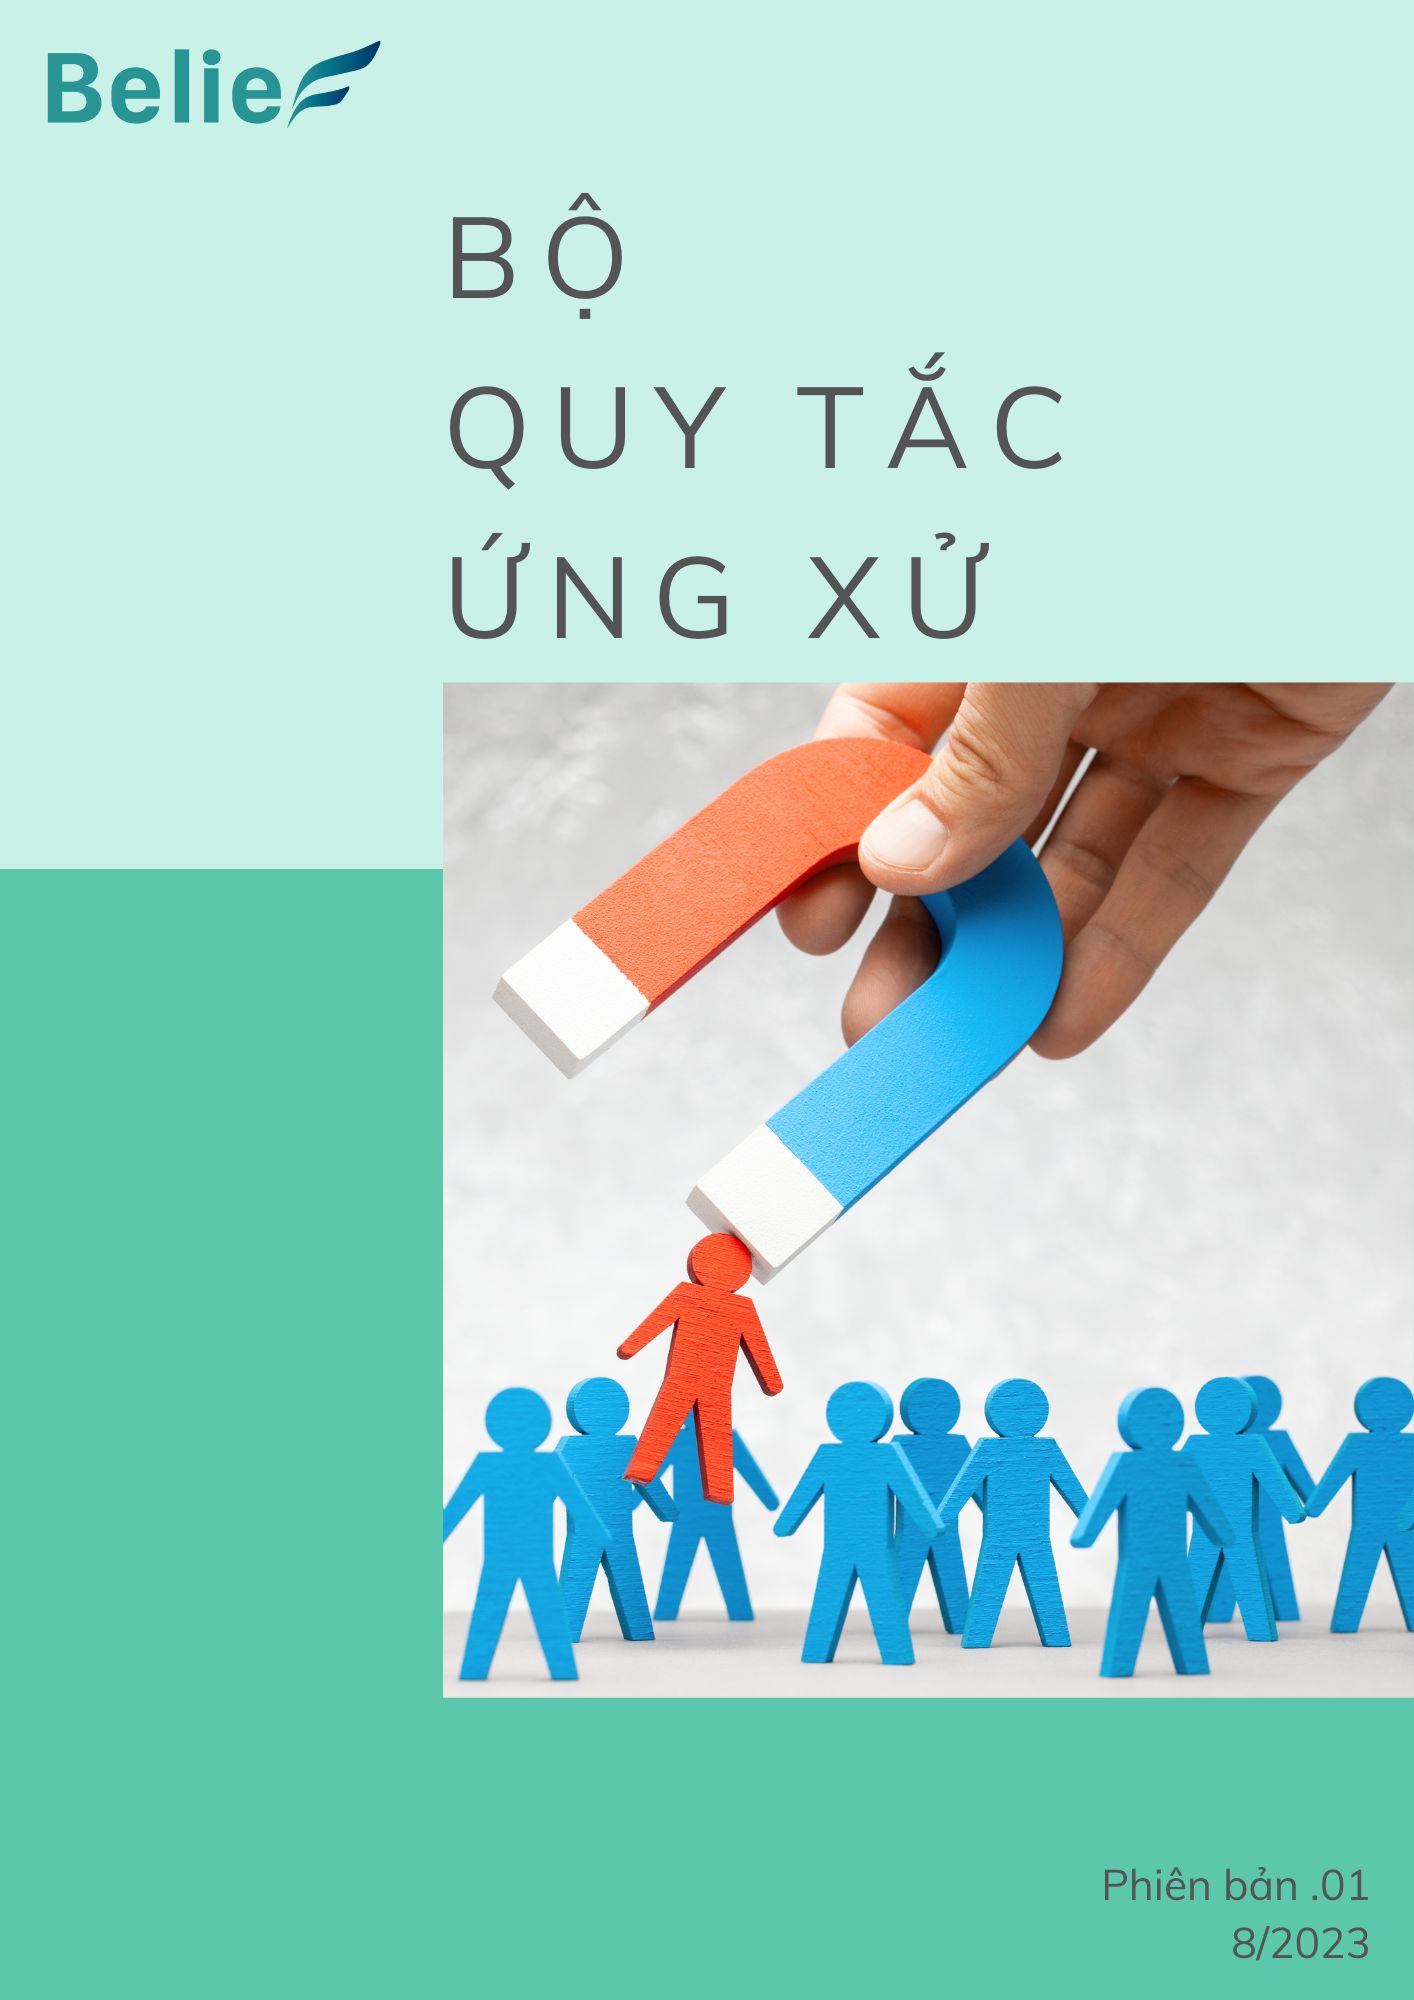 Bộ quy tắc ứng xử Belief Holdings